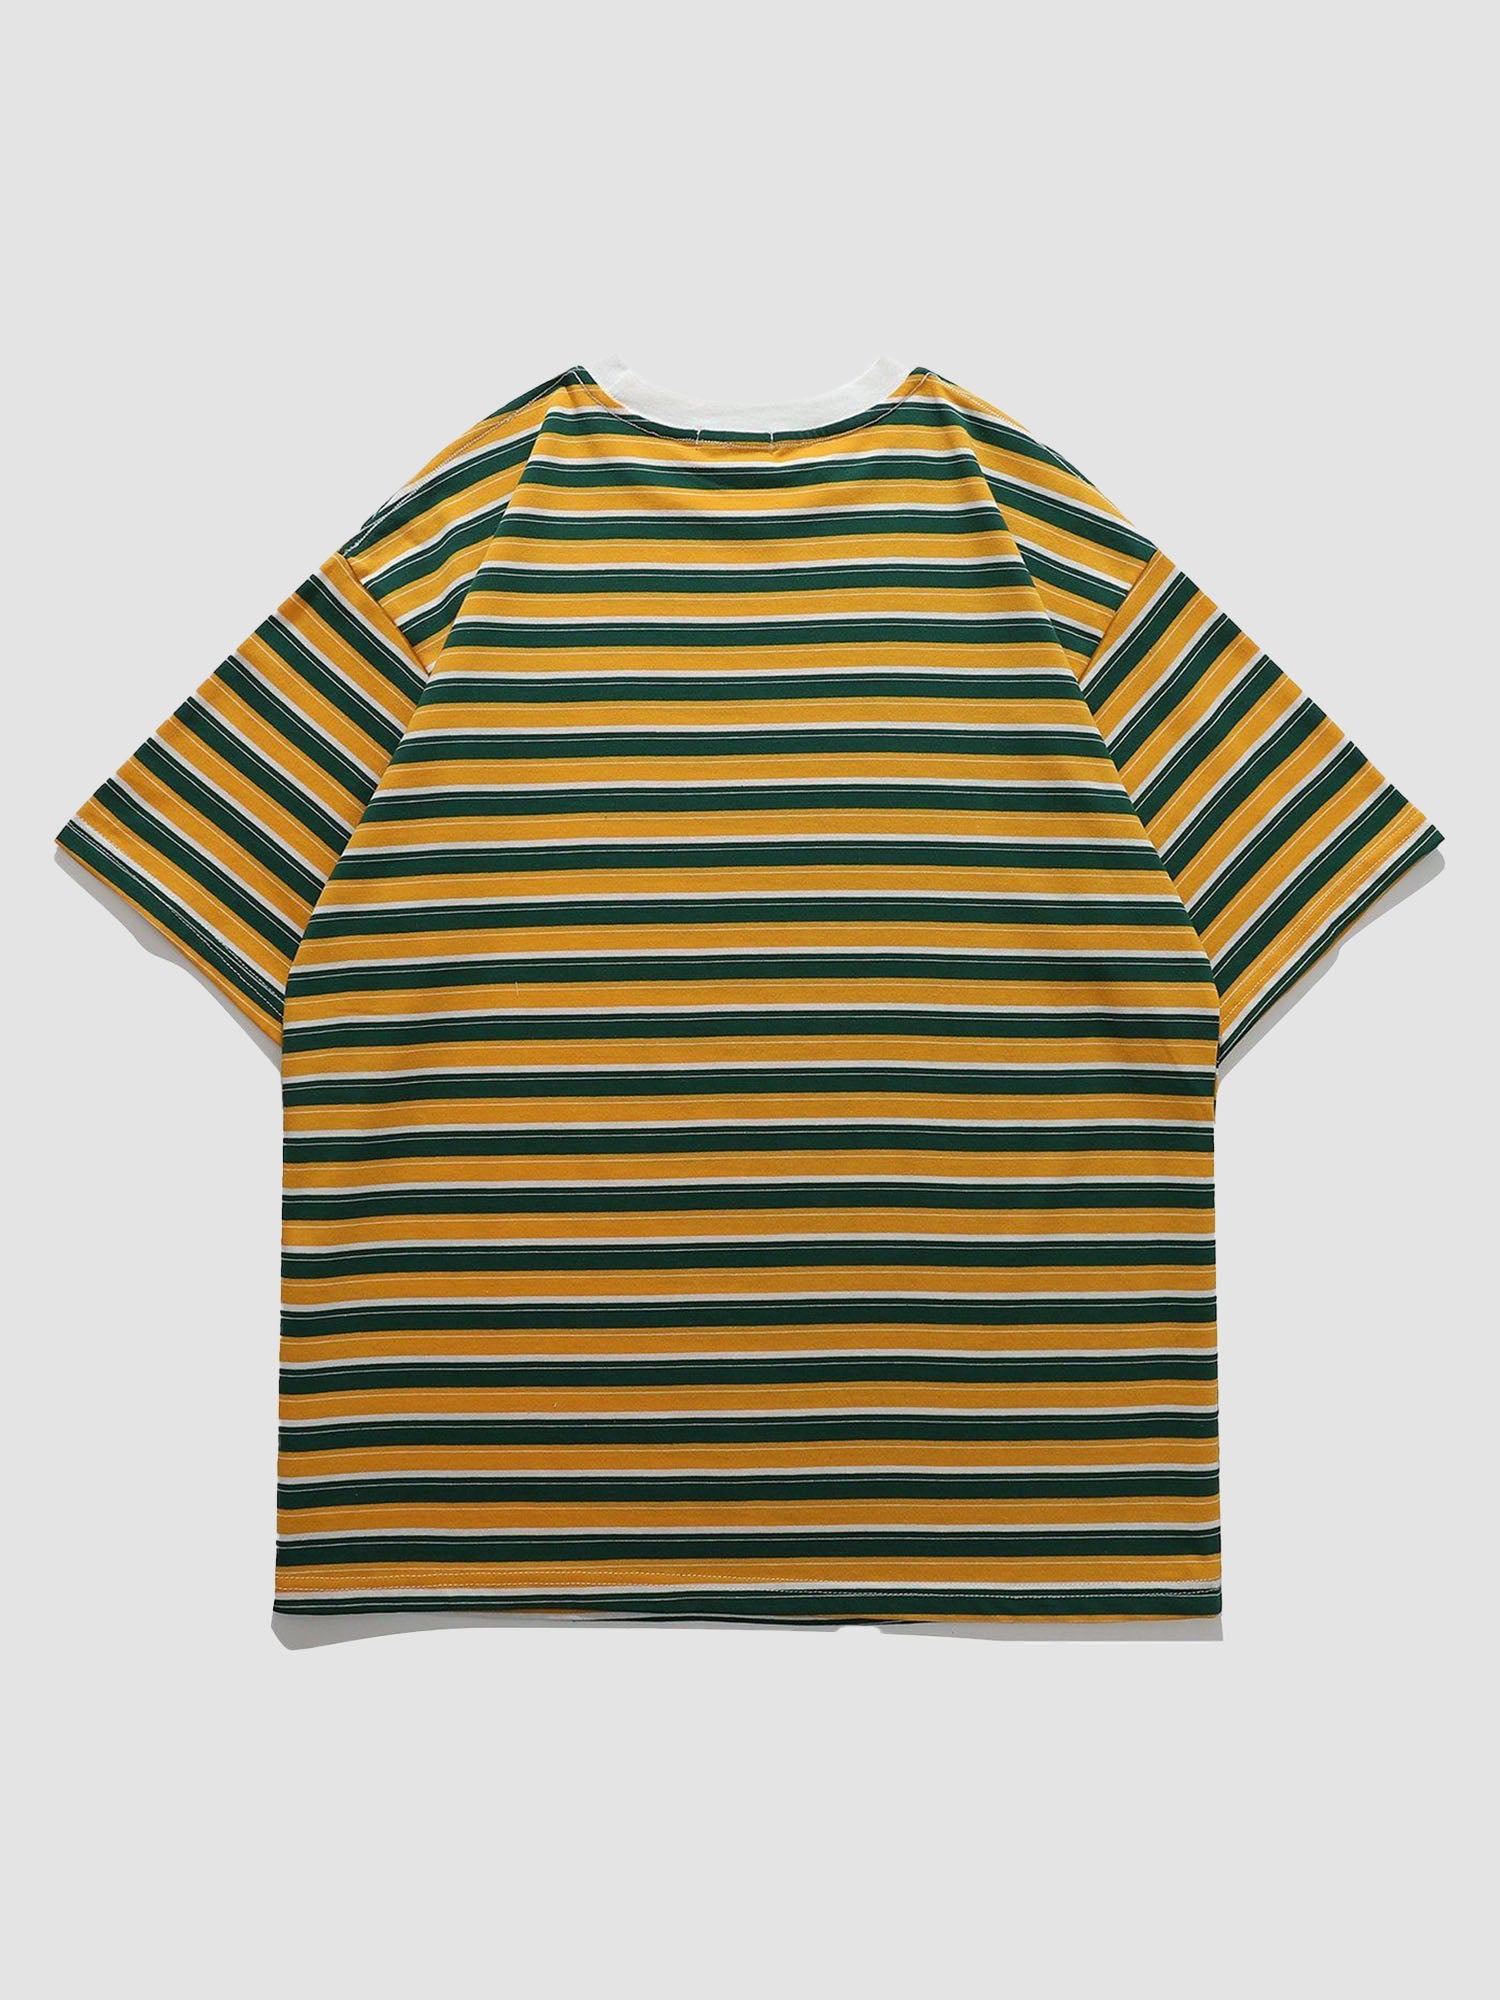 JUSTNOTAG Striped Contrast Short Sleeve Tee